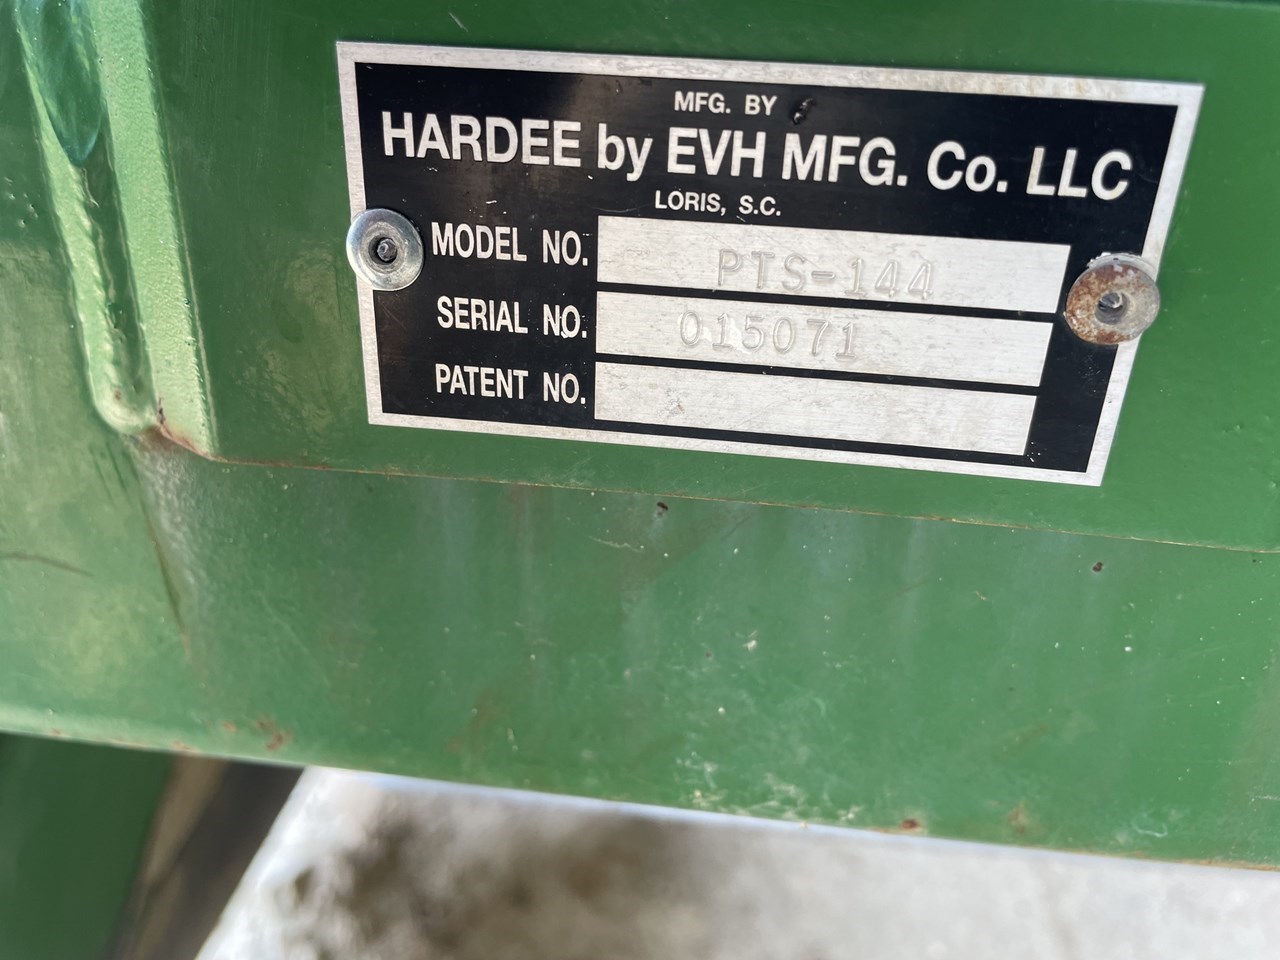 2019 EVH Hardee PTS 144 Attachments For Sale